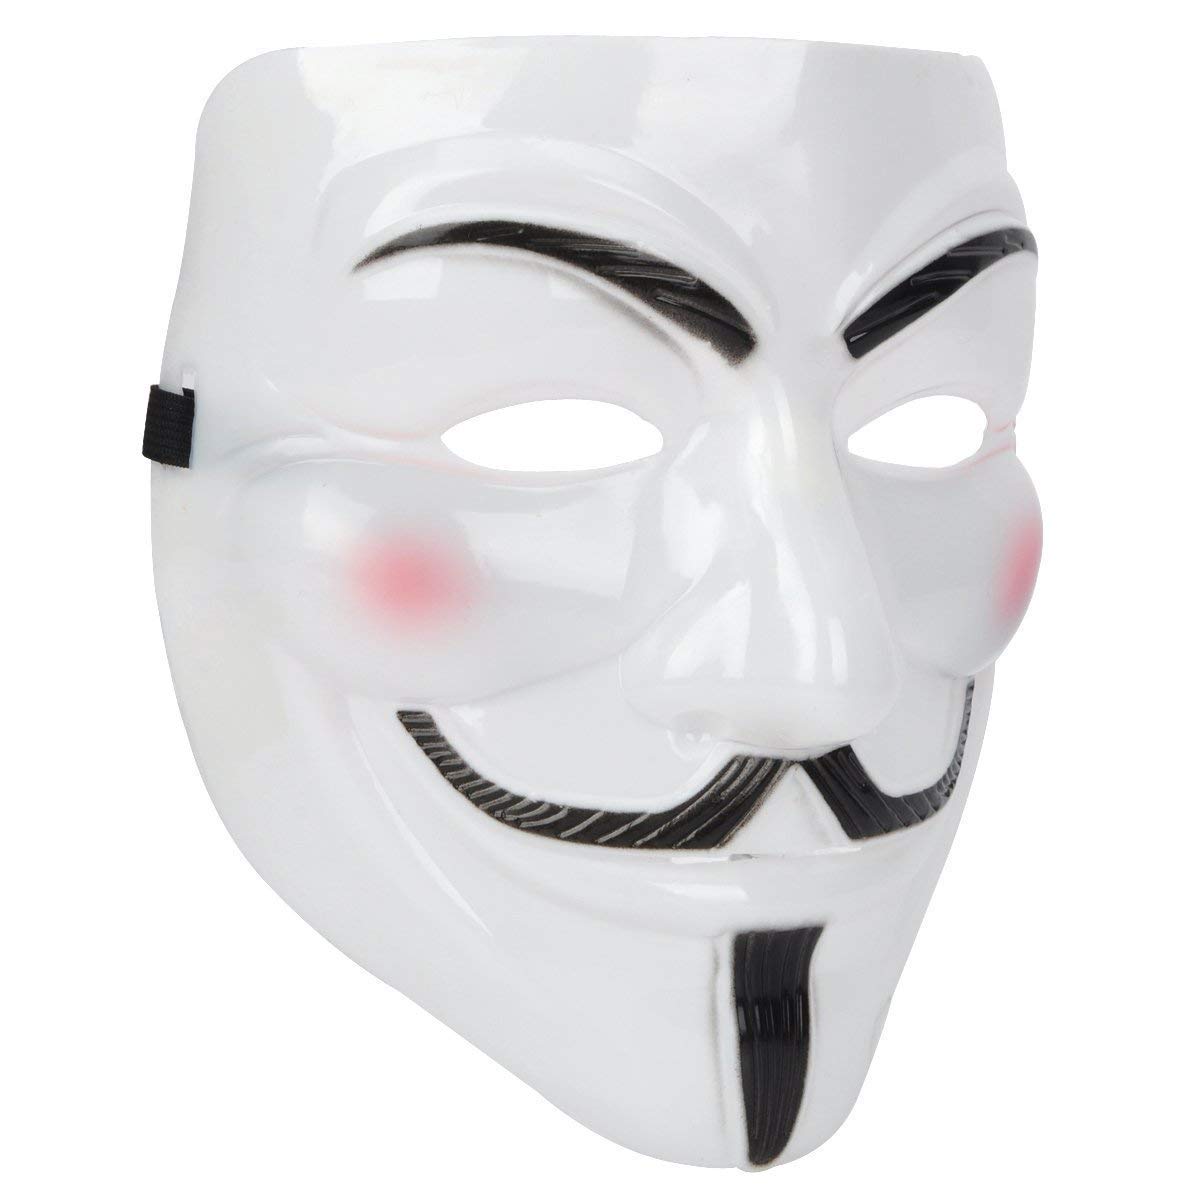 guy fawkes – anonymus (6)